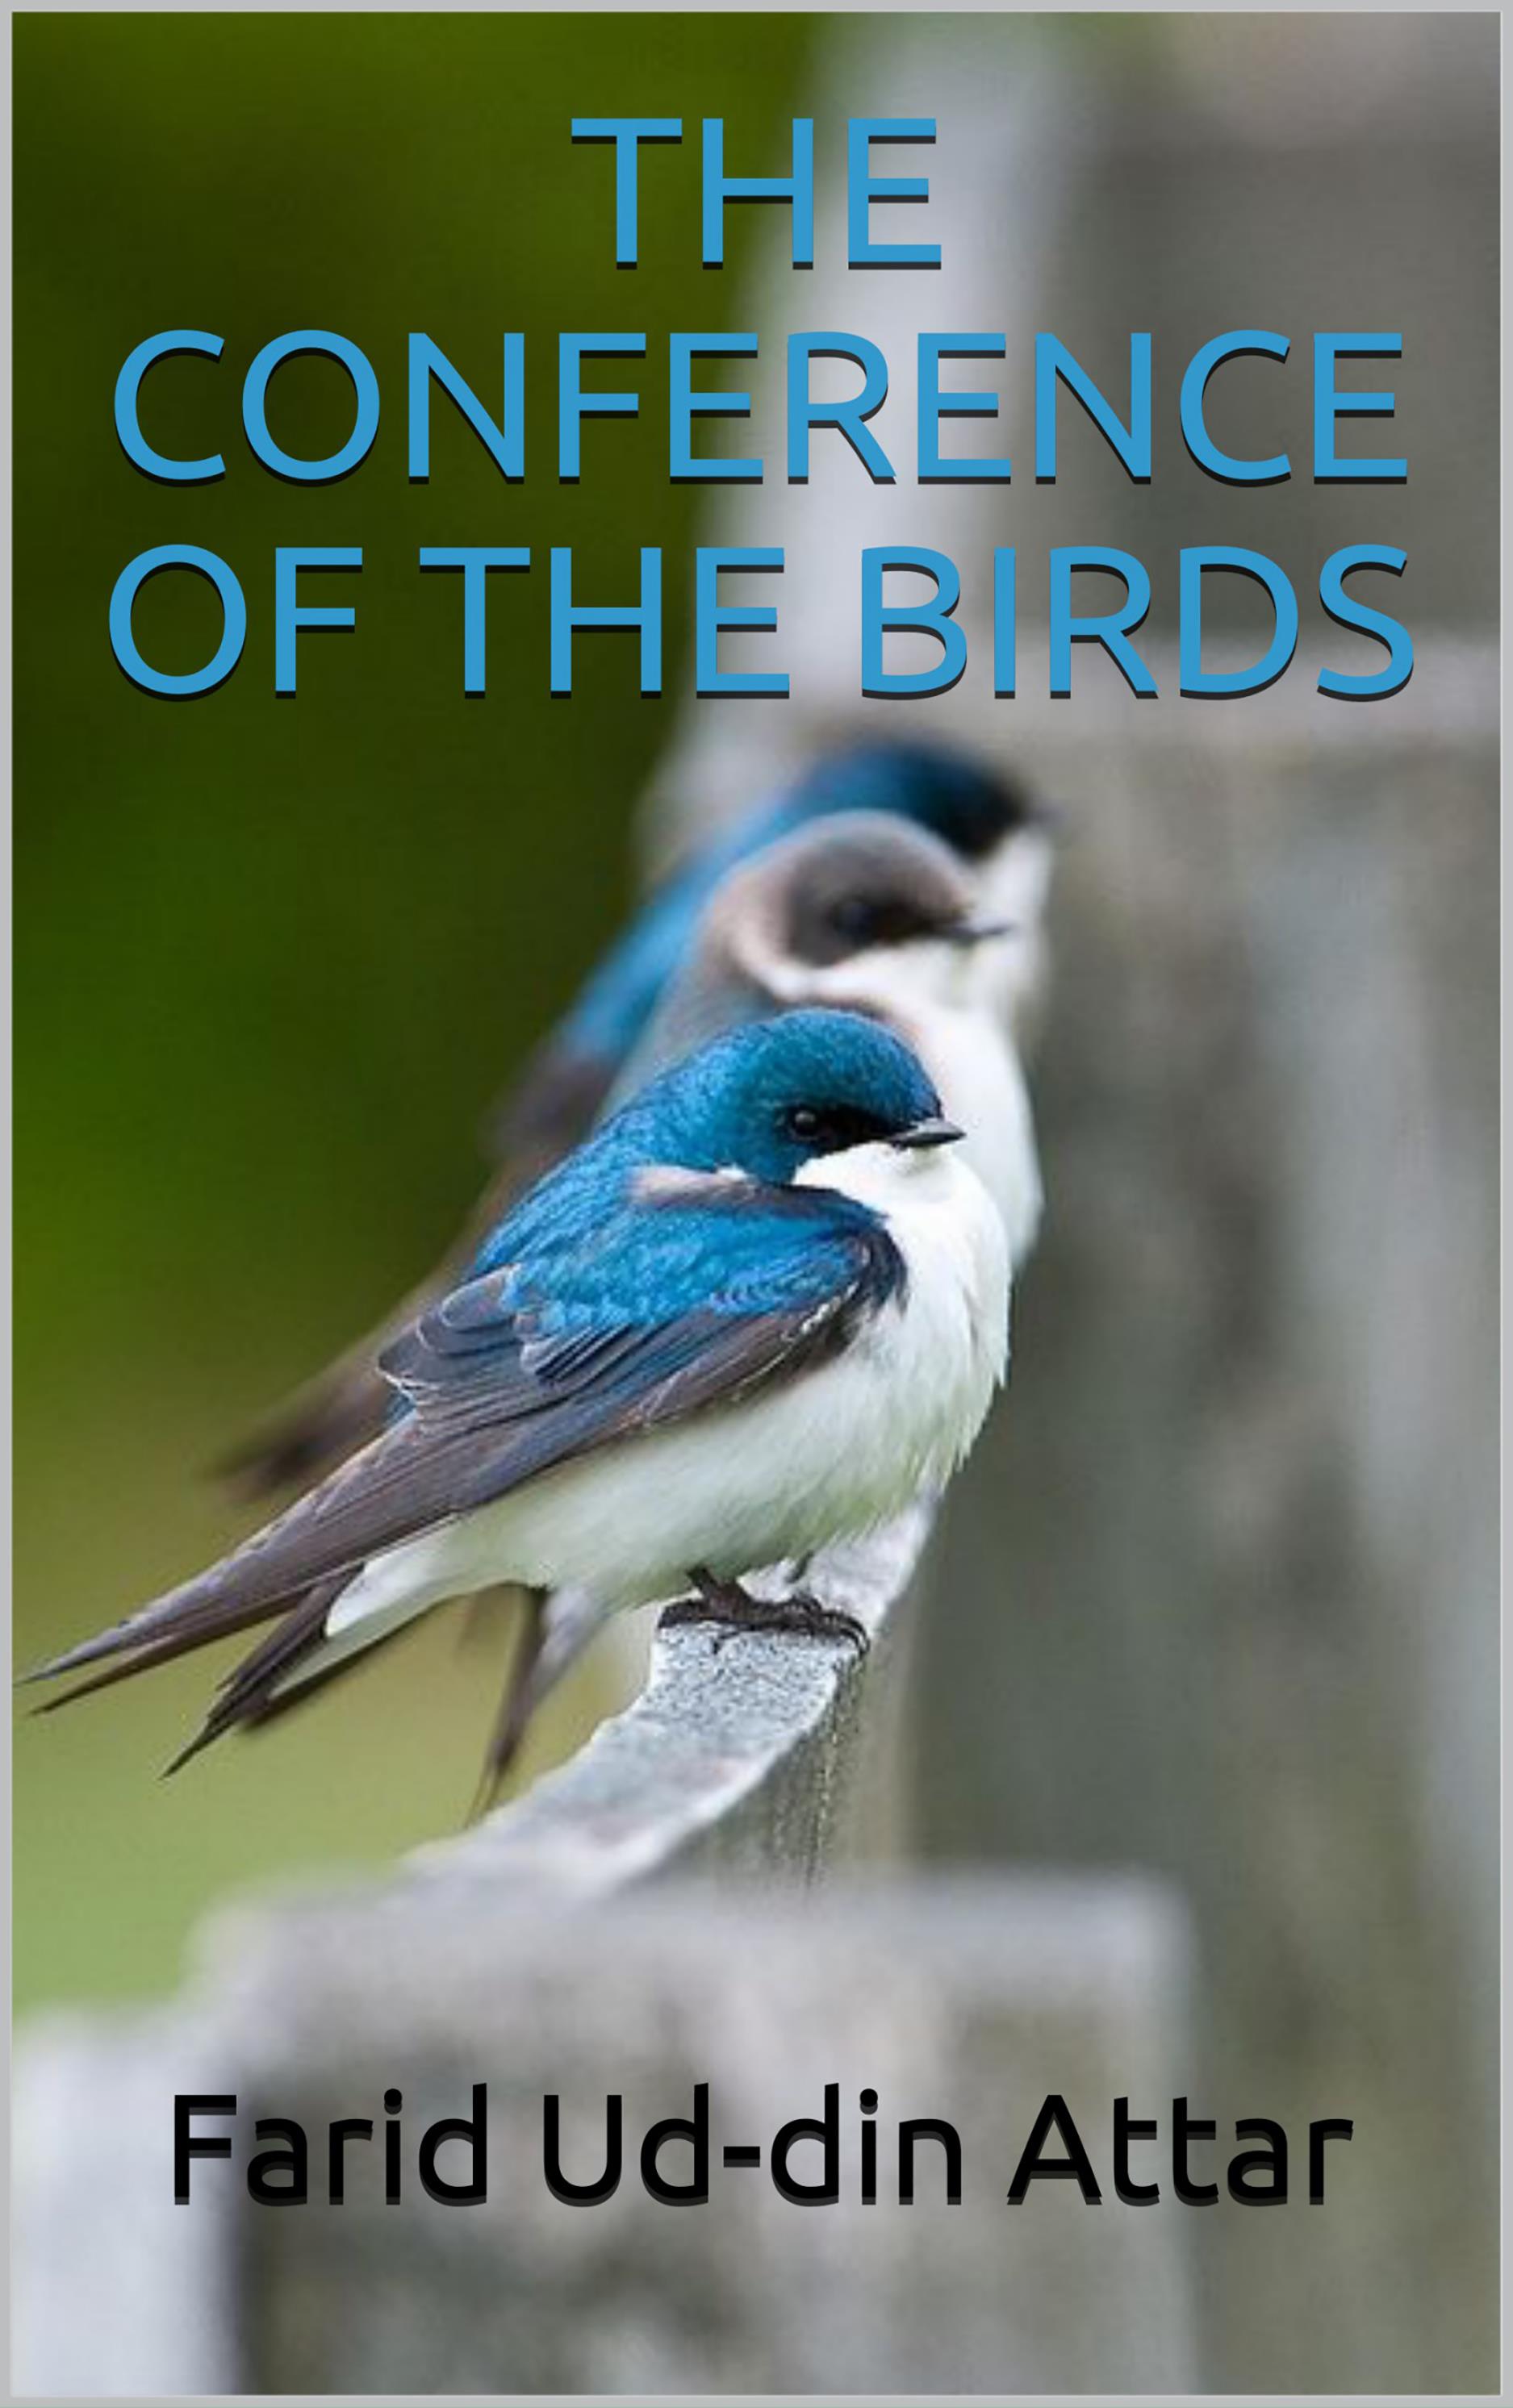 The conference of the bird